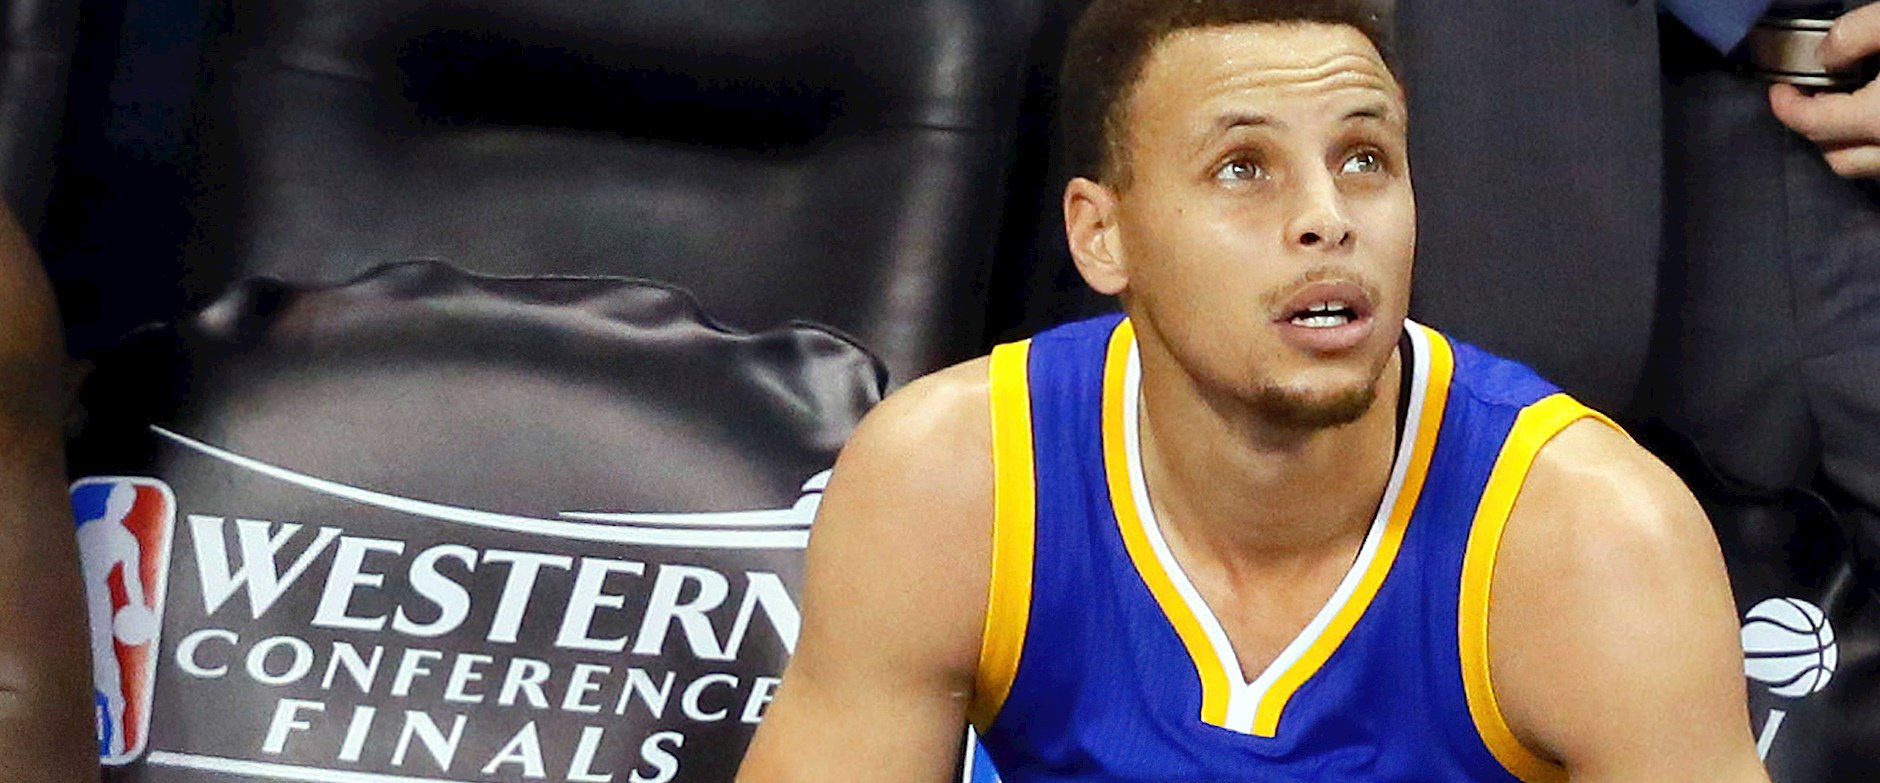 NBA player Stephen Curry